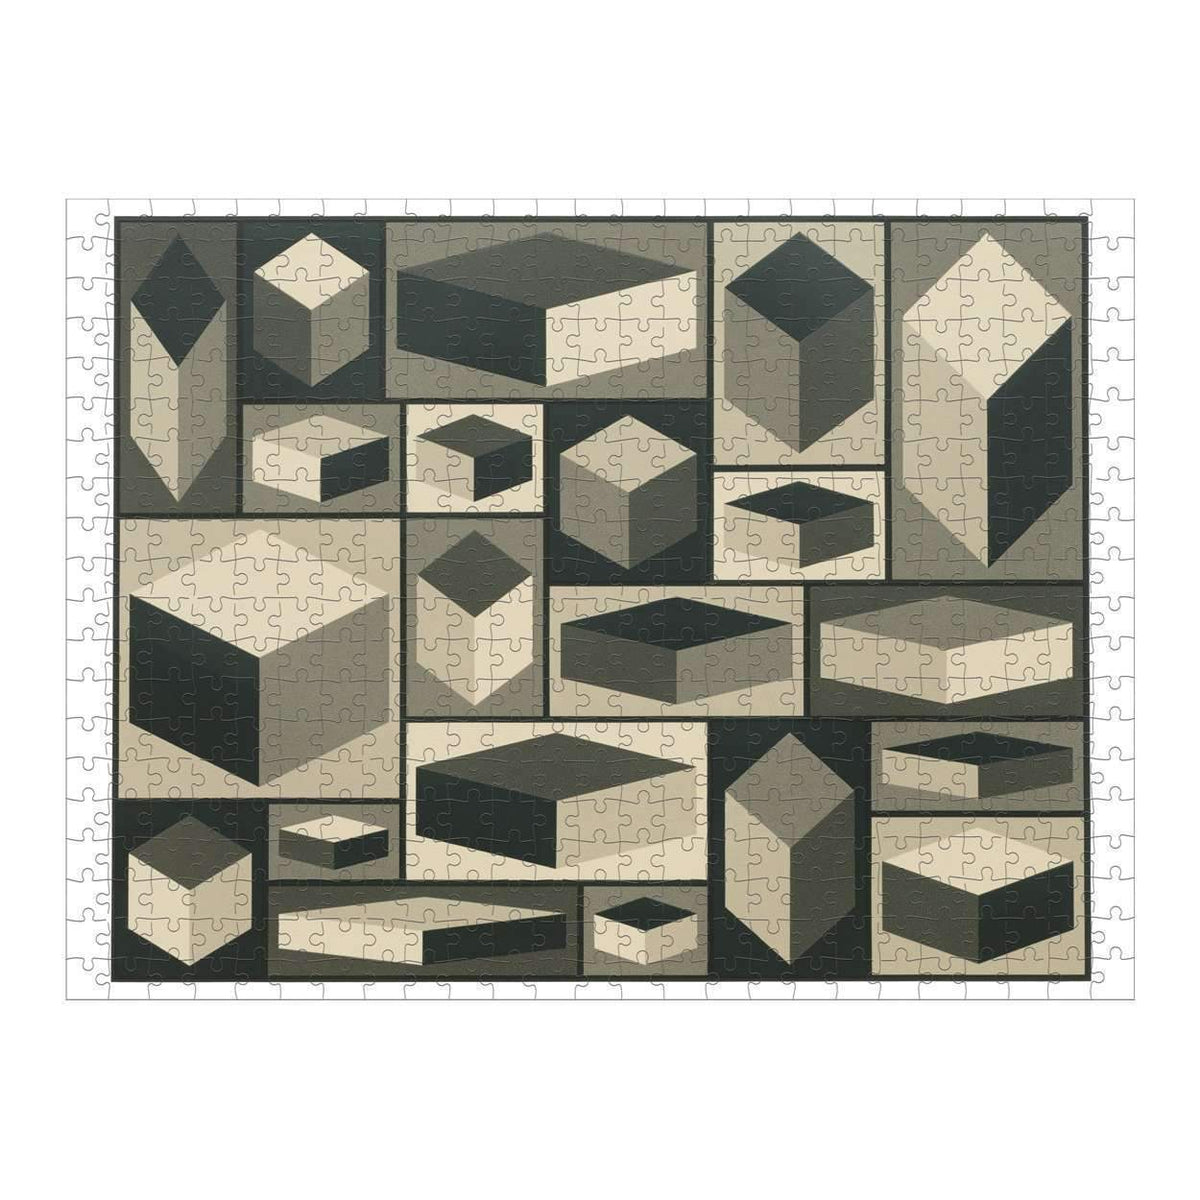 MOMA Sol Lewitt Distorted Cubes 2-Sided 500 Piece Puzzle - Quick Ship - Puzzlicious.com